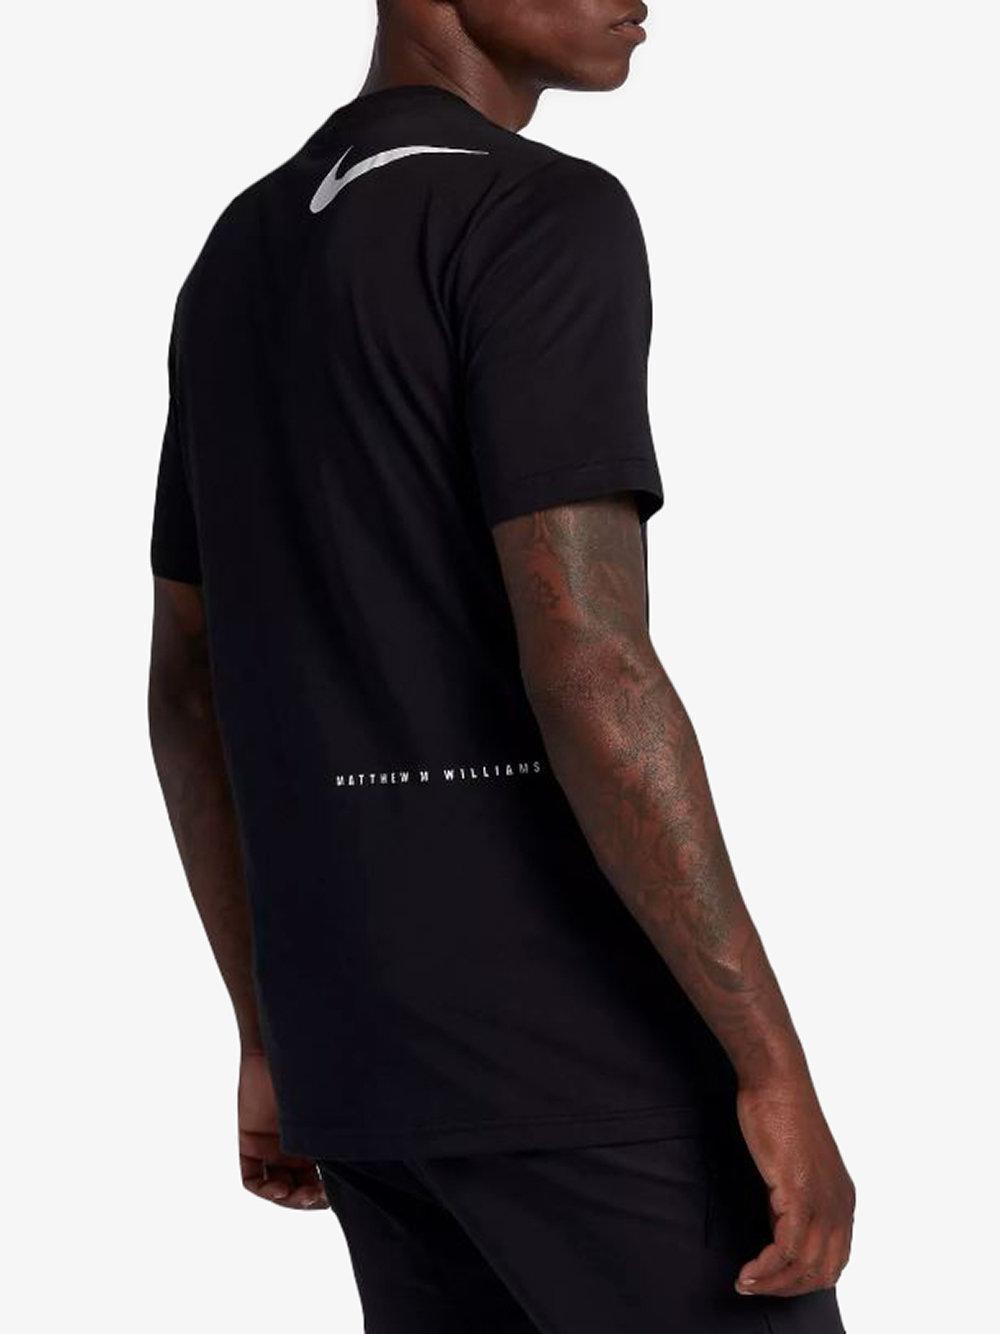 Nike Cotton X Mmw Graphic T-shirt in Black for Men - Lyst